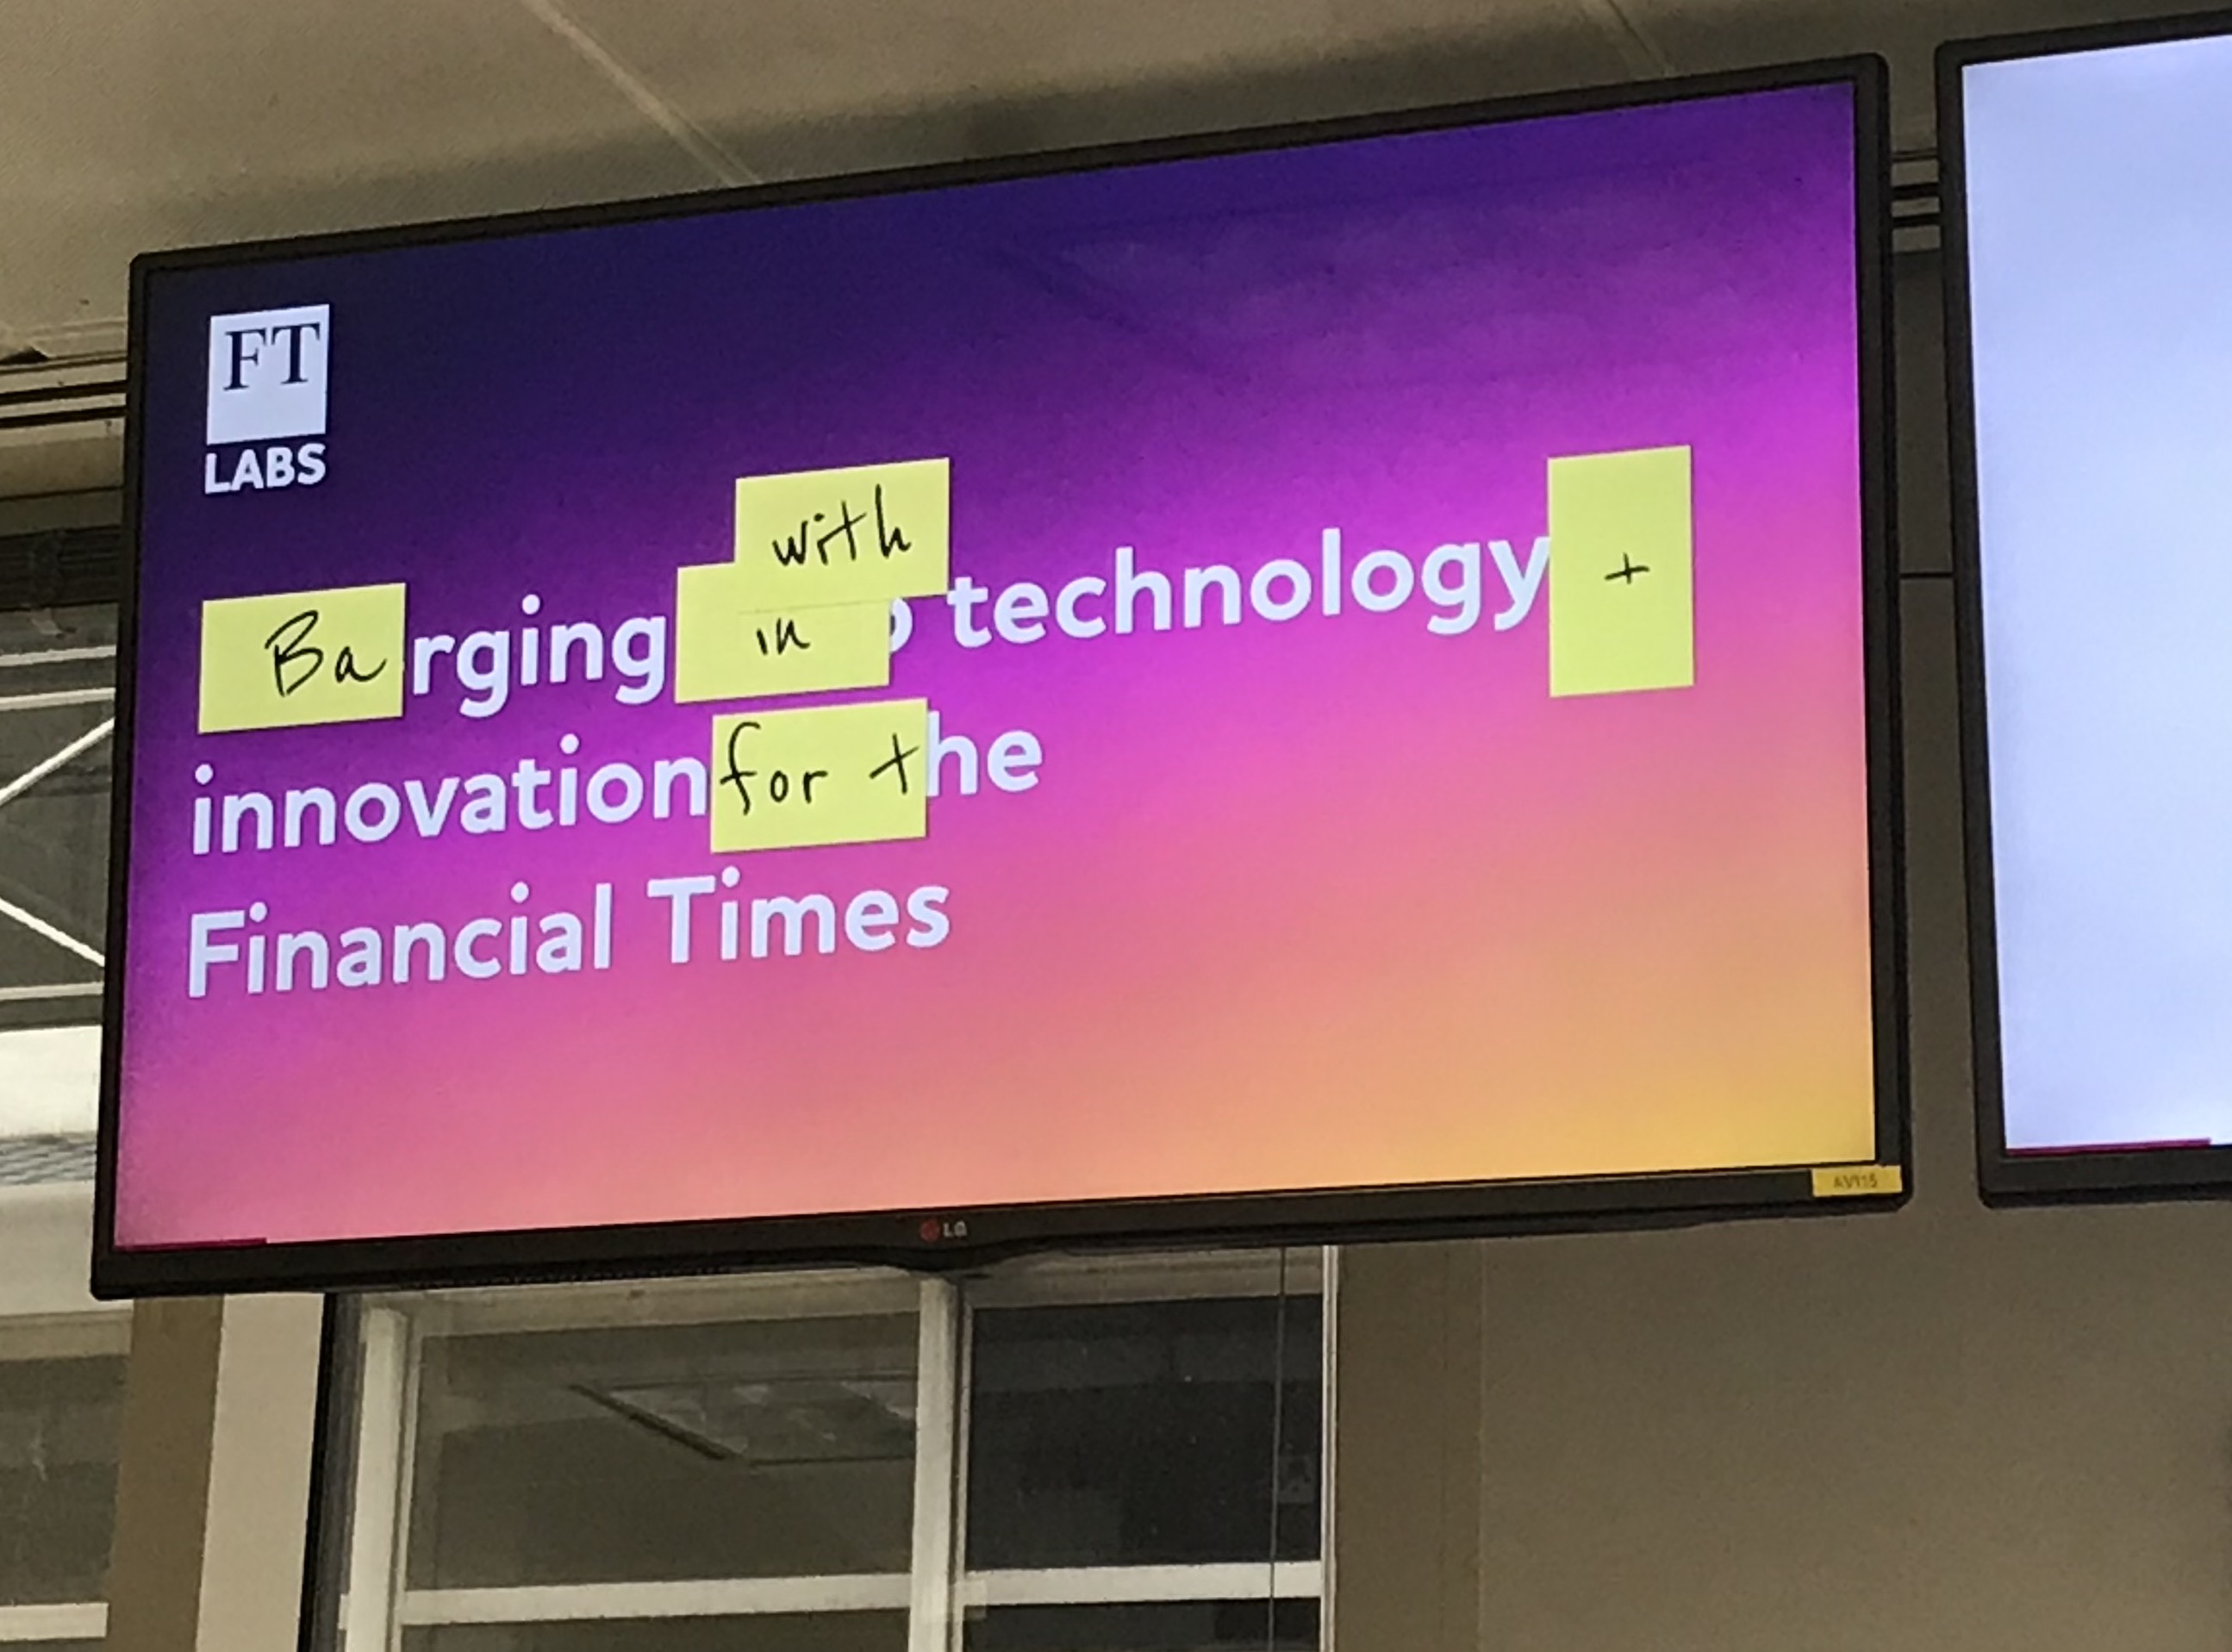 Digital poster: FT Labs, Barging in with technology + innovation for the Financial Times.